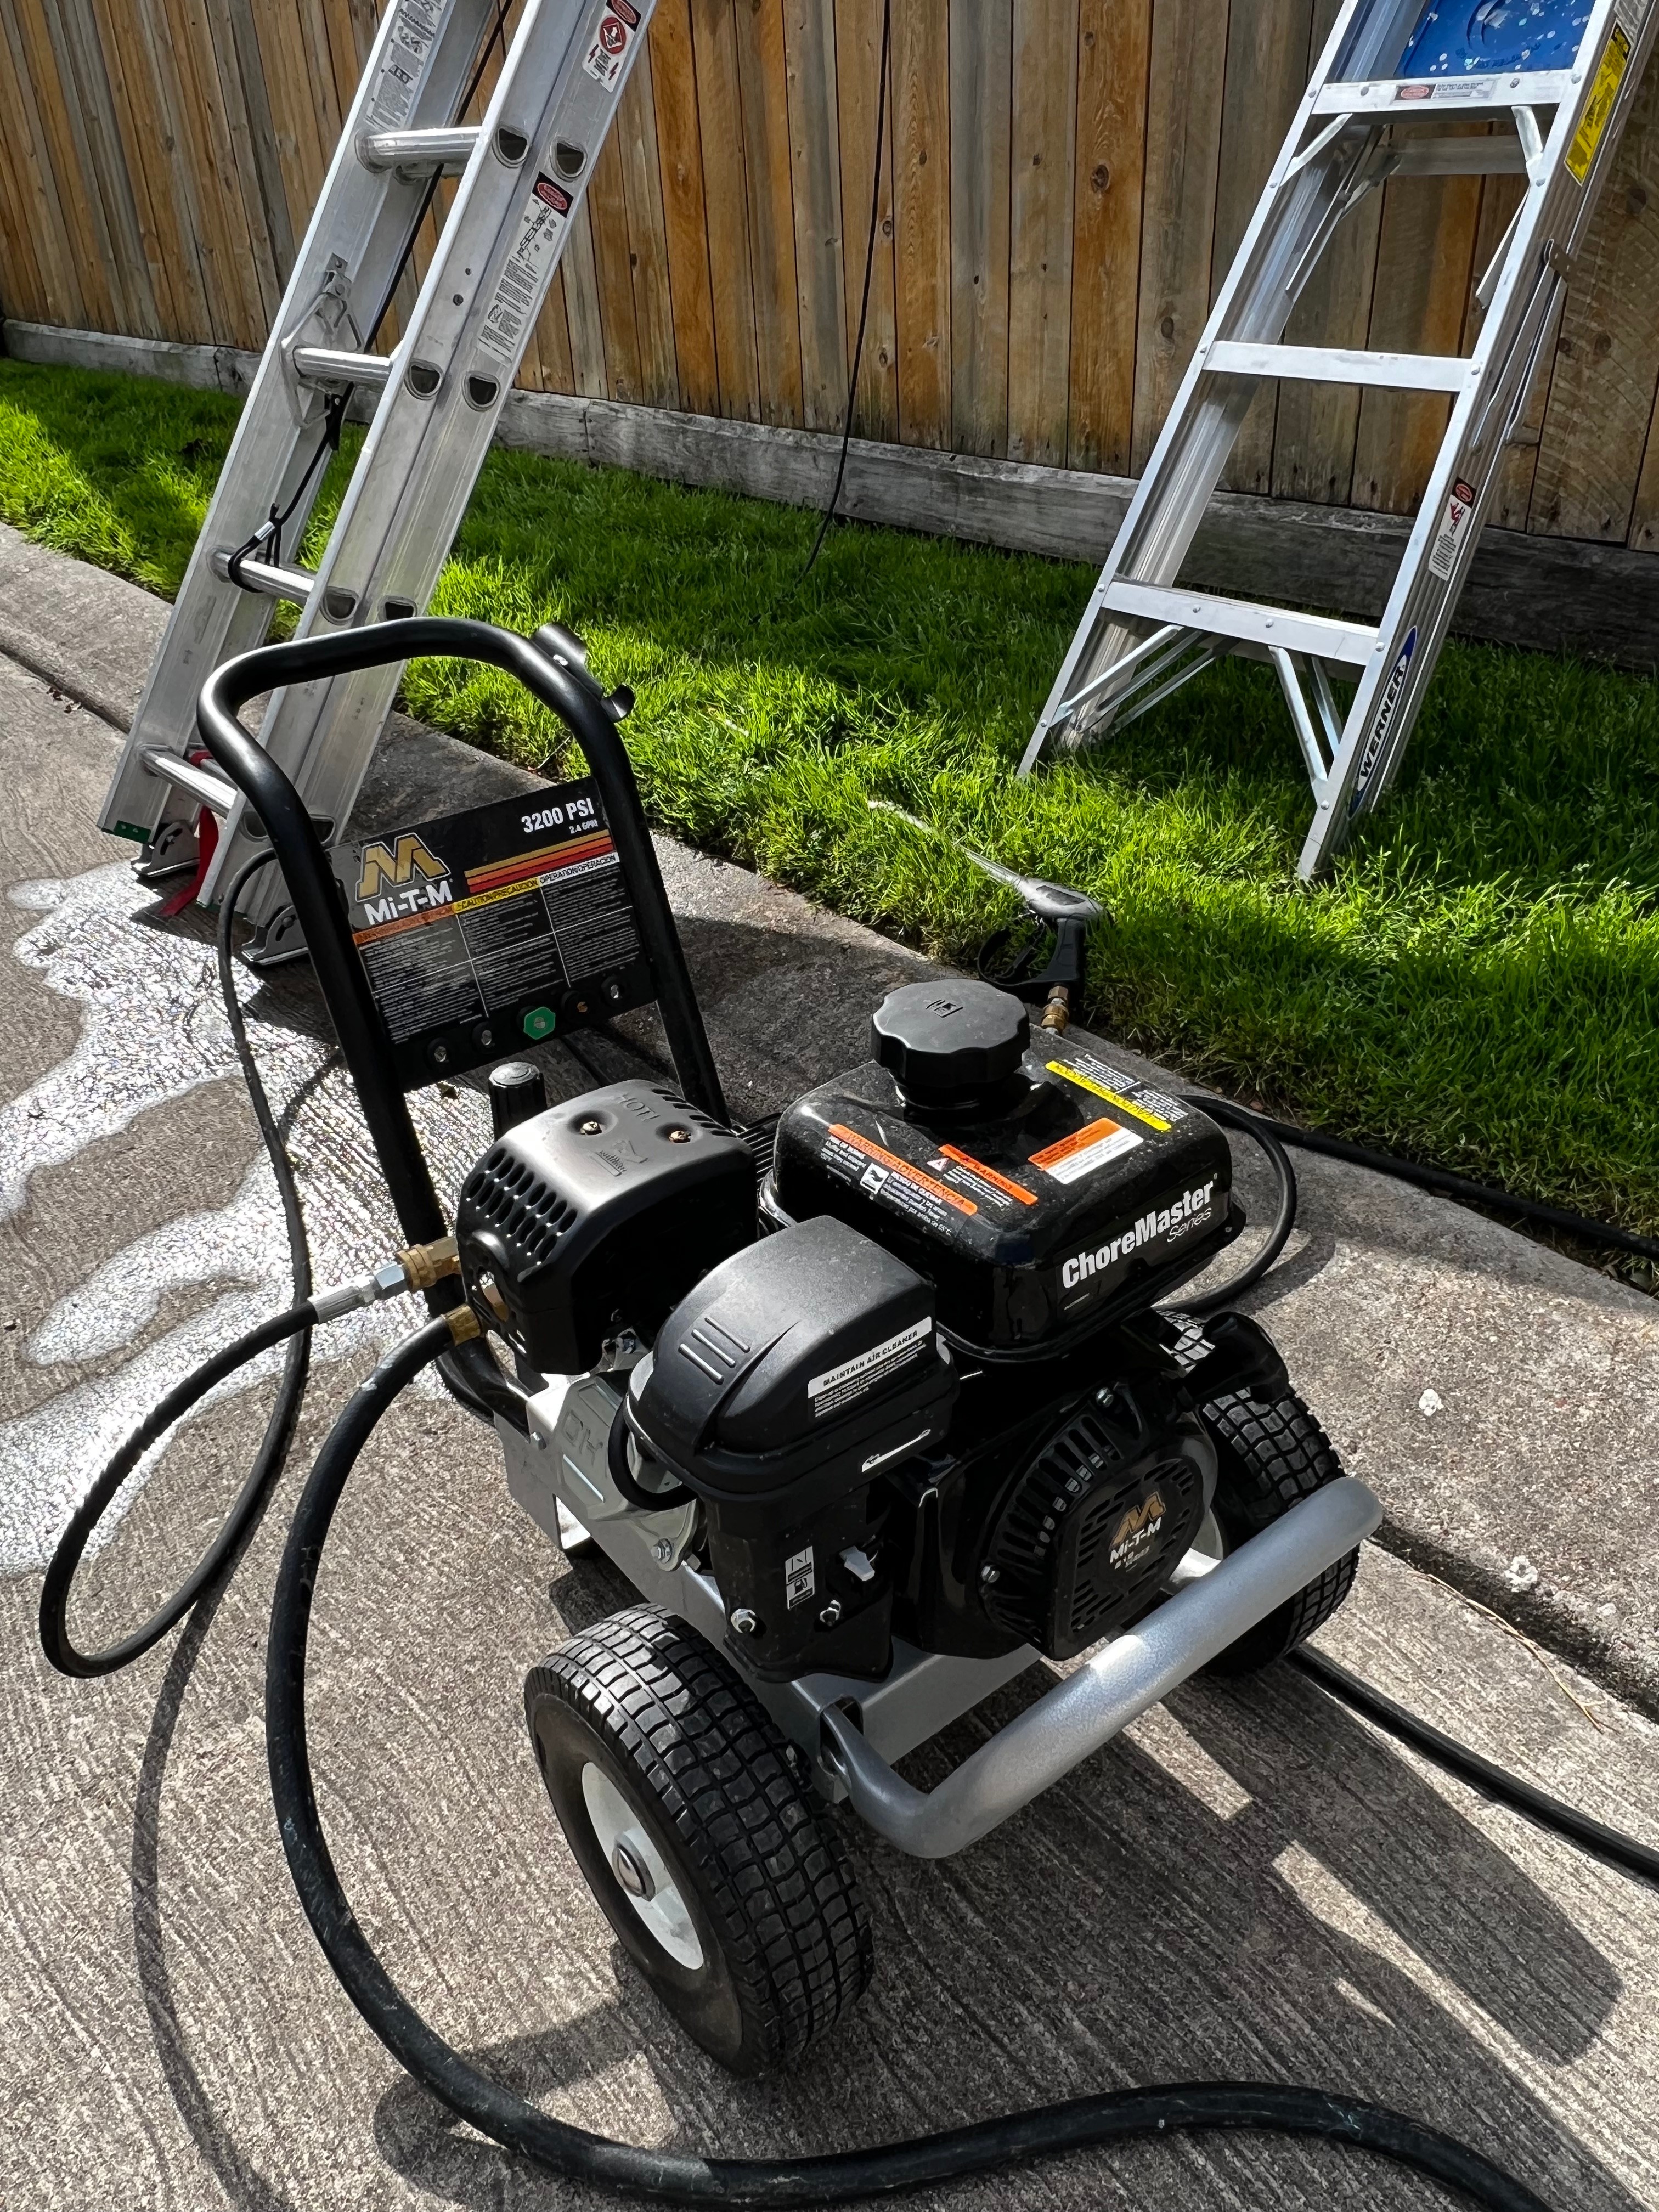 Pressure Washing for 911 Painters in Houston, TX